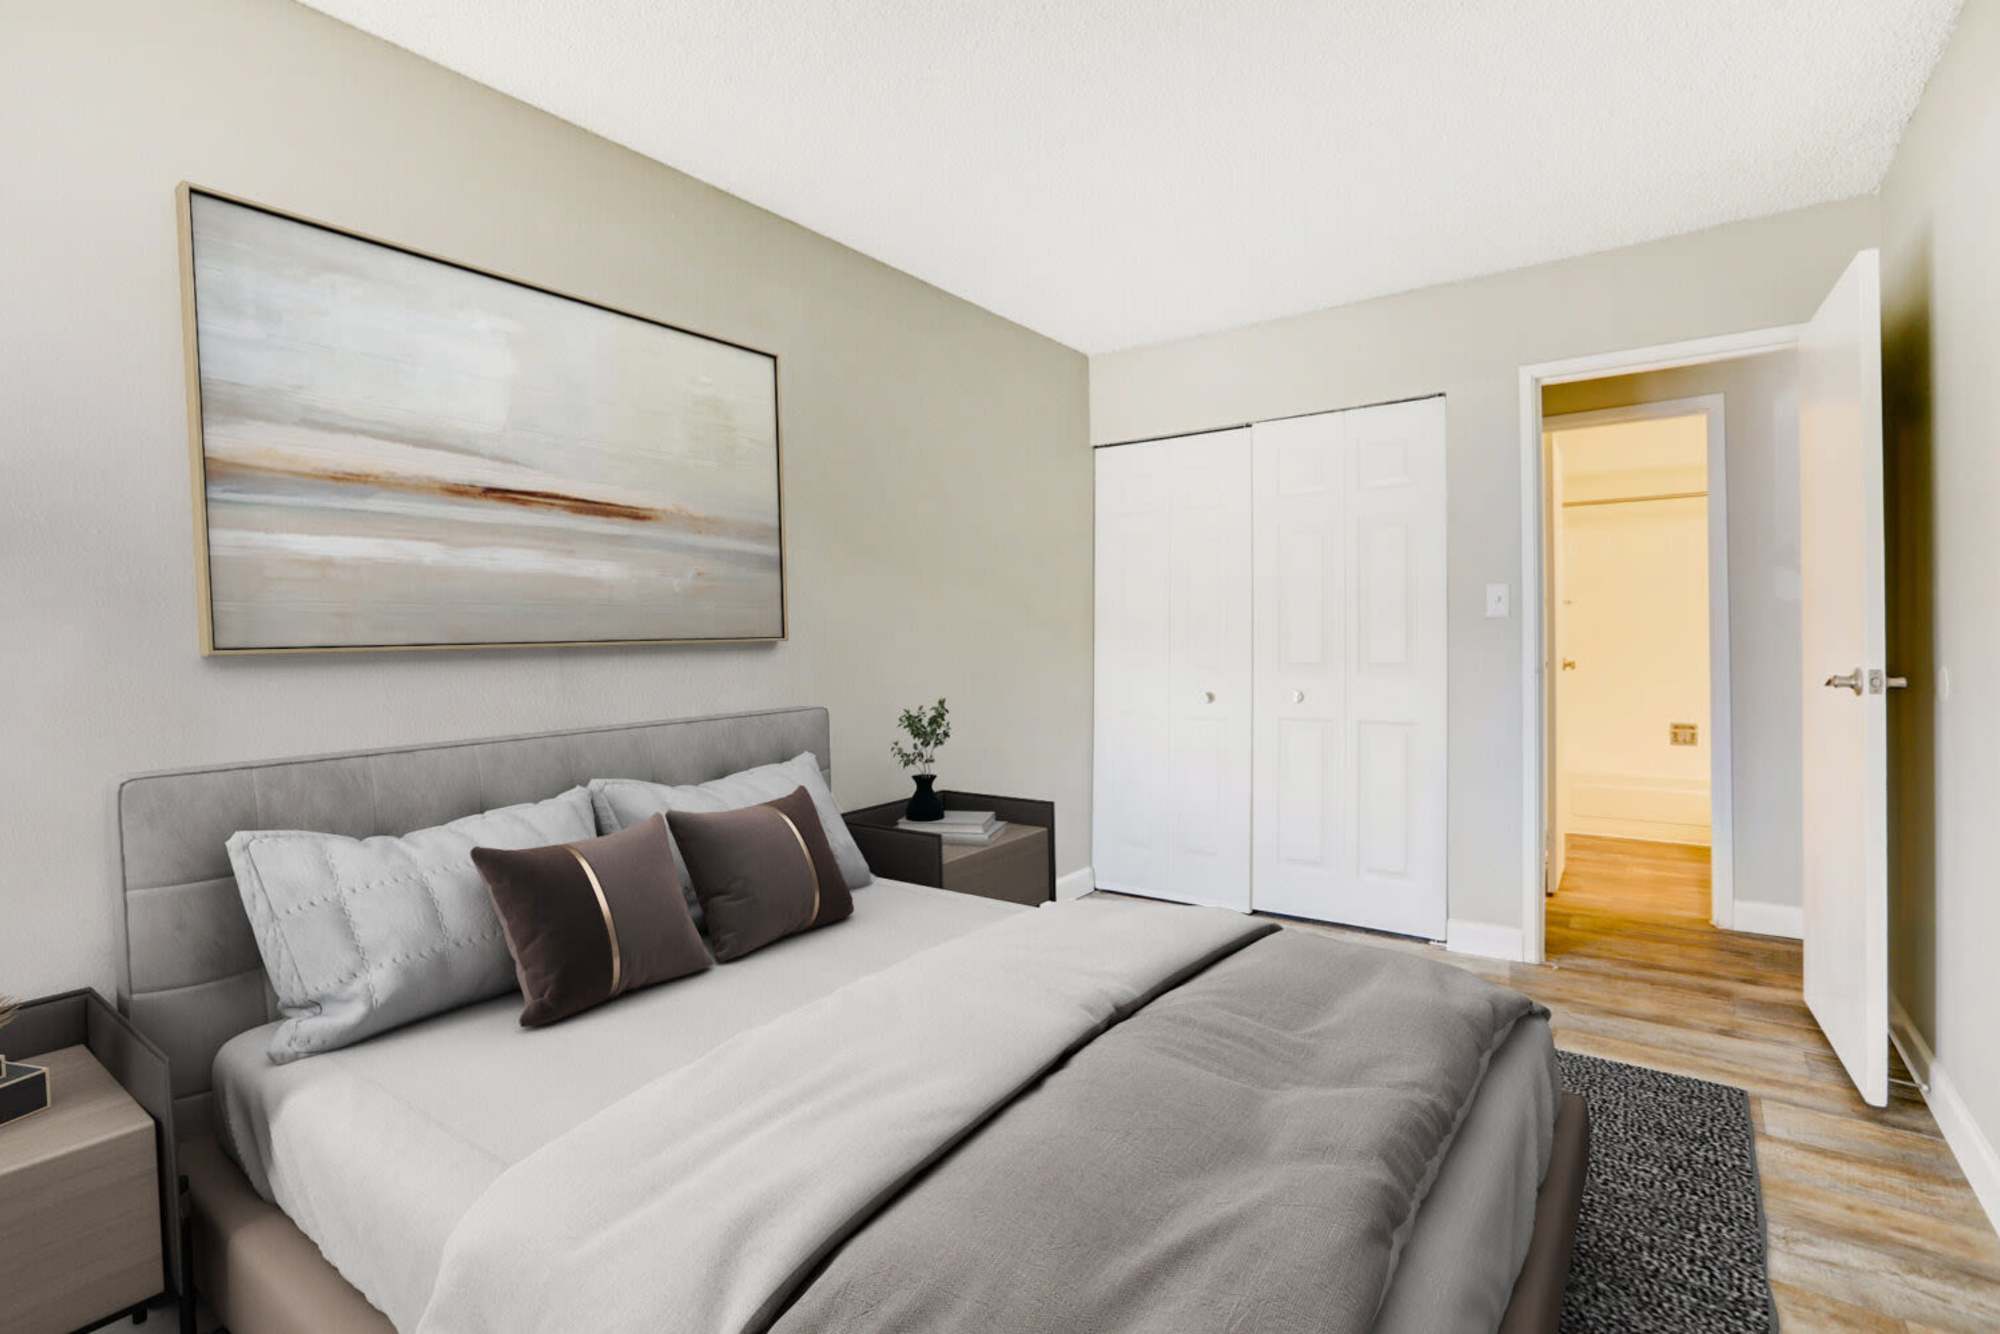 A king-sized bed in a model apartment bedroom at Ascent at Lowry in Denver, Colorado